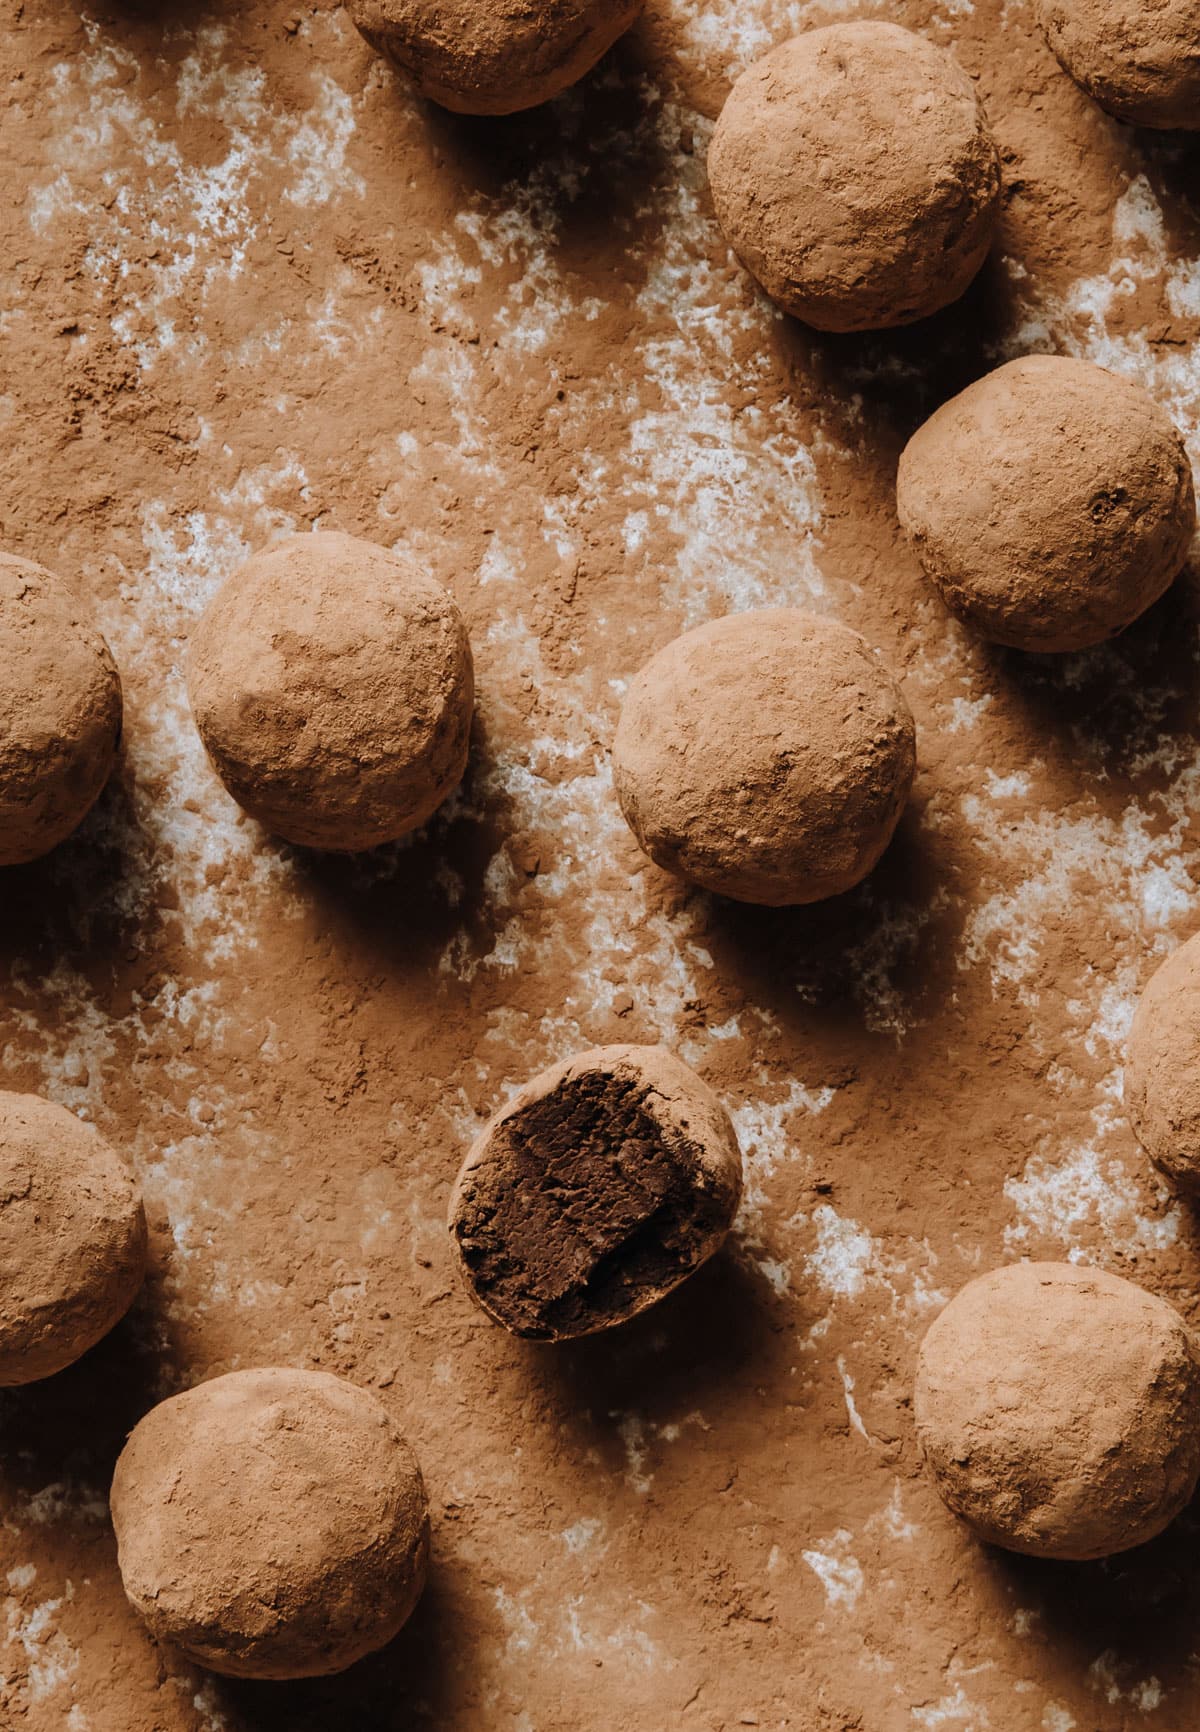 Truffles dusted with cocoa powder.